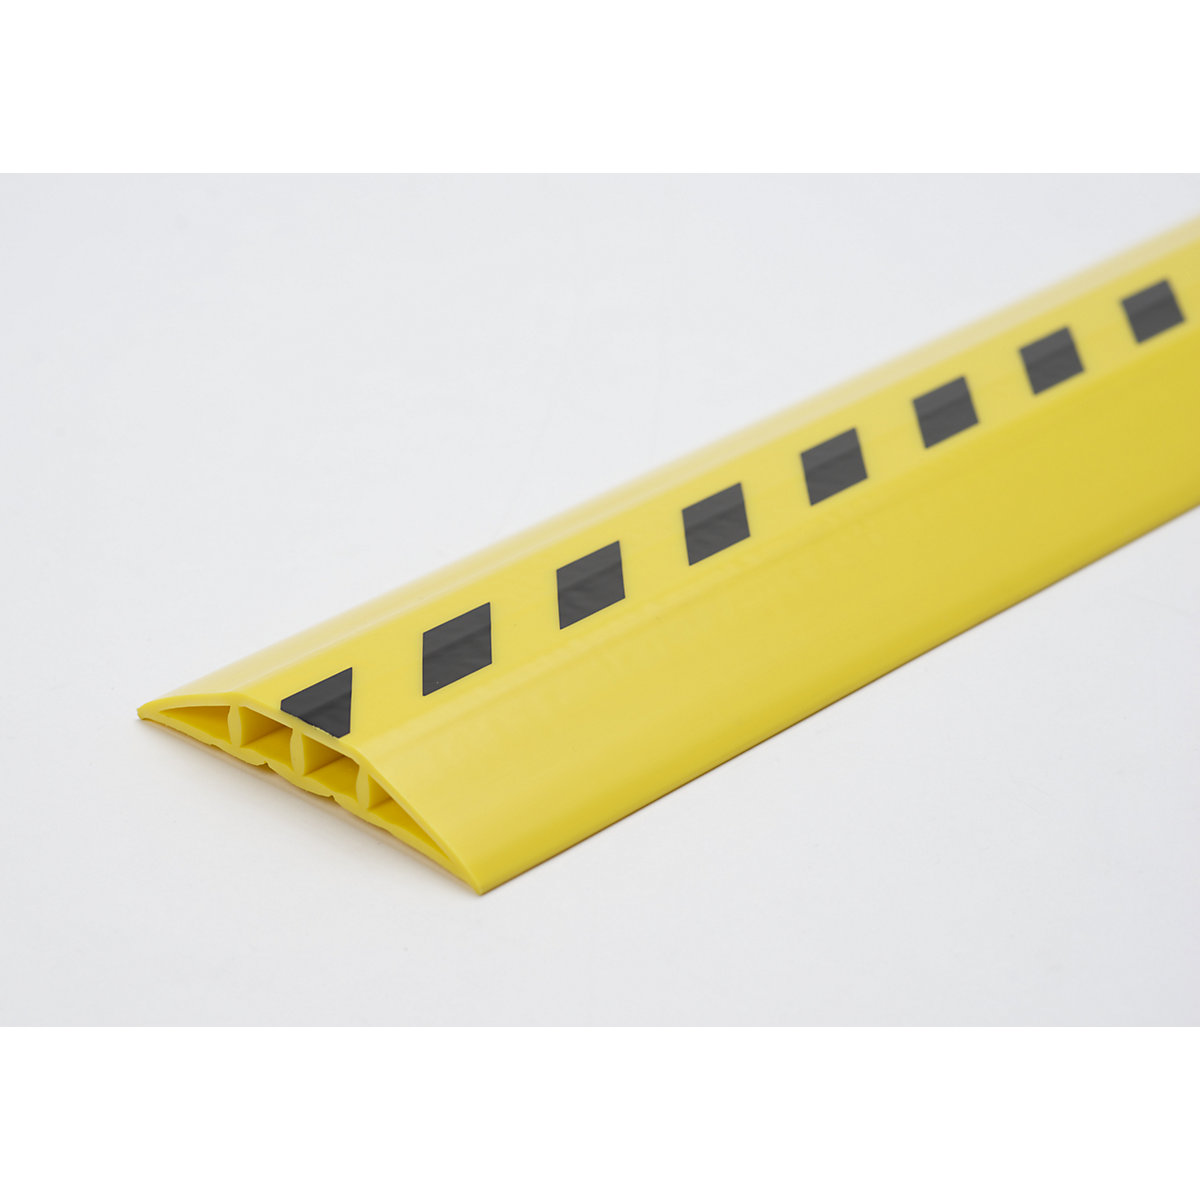 Plastic cable duct, for cables and hoses with Ø up to 10 mm, black/yellow, 2 chambers, length 1.5 m-4